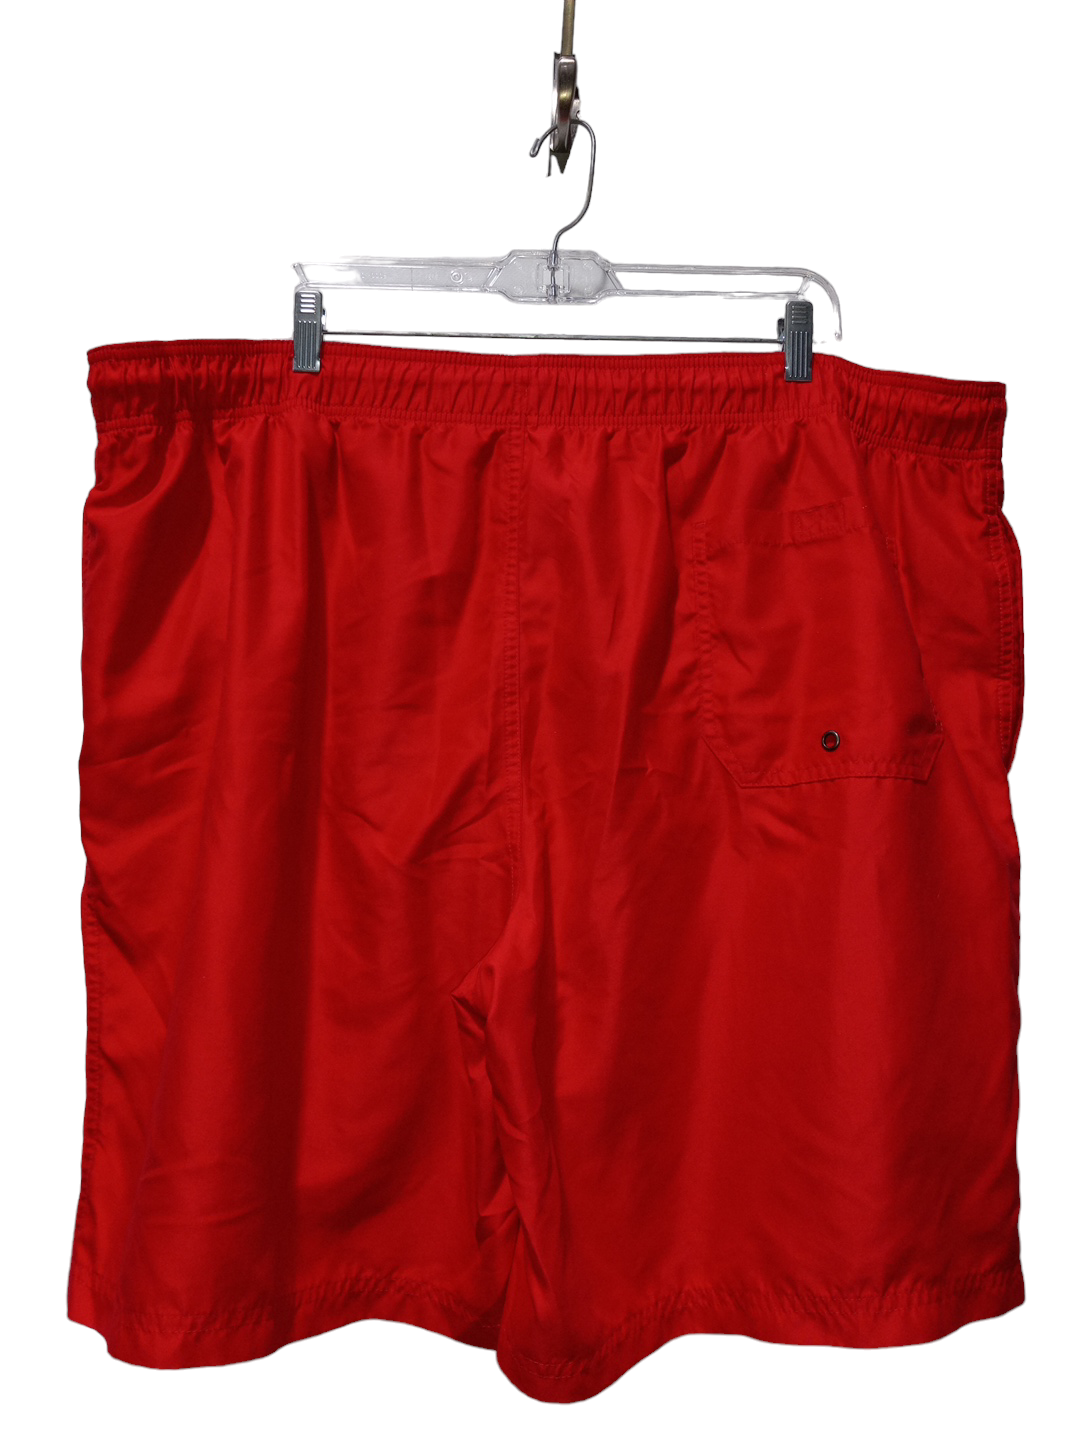 Red Athletic Shorts Op, Size 2x